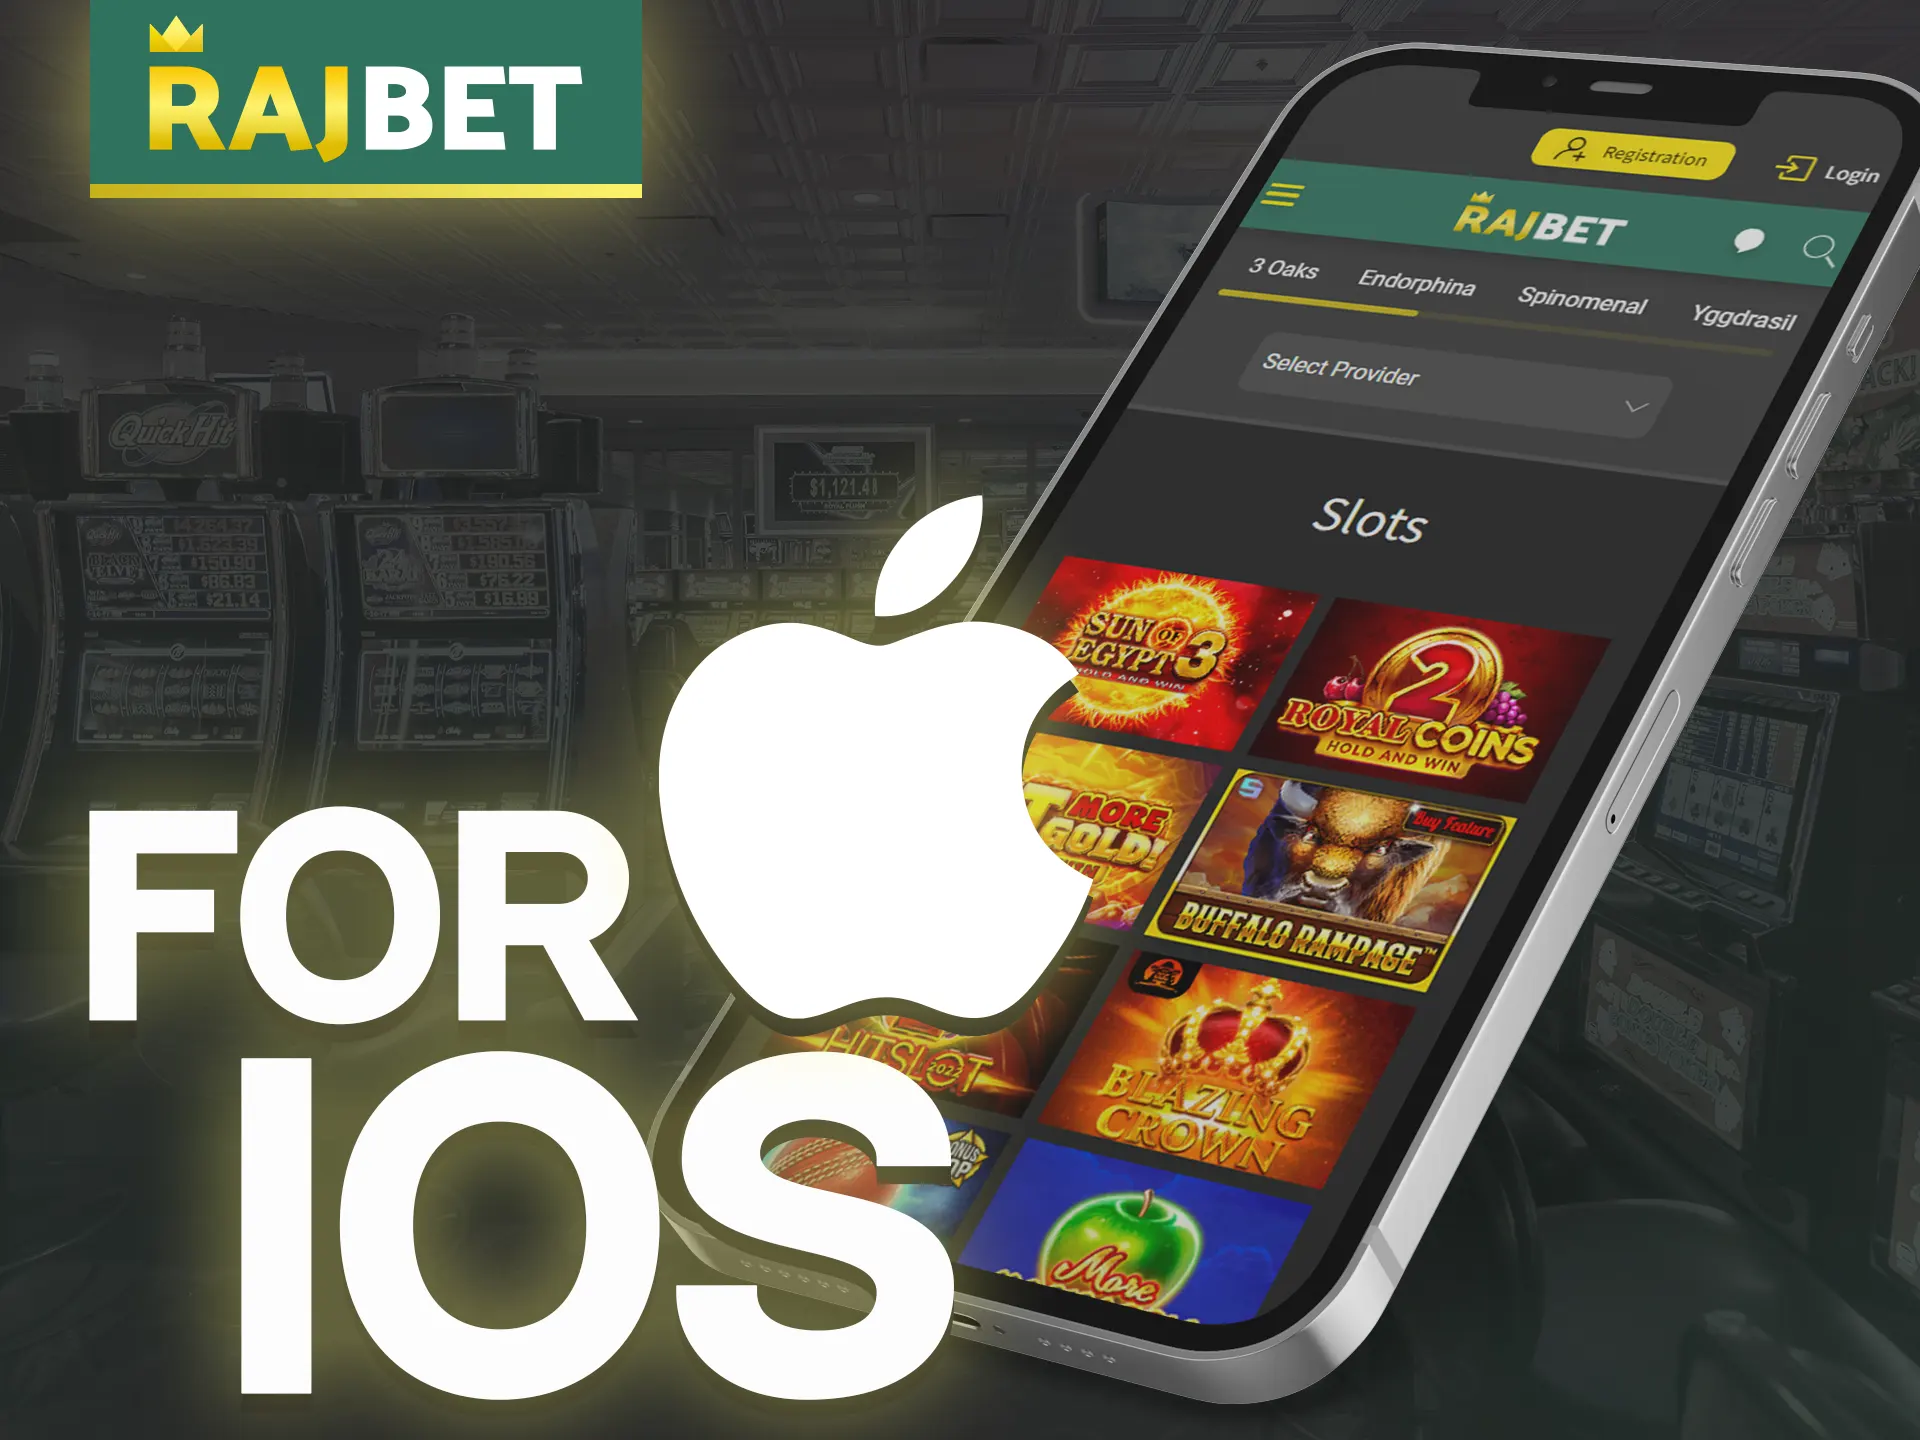 Play at Rajbet online casino from your iOS device.